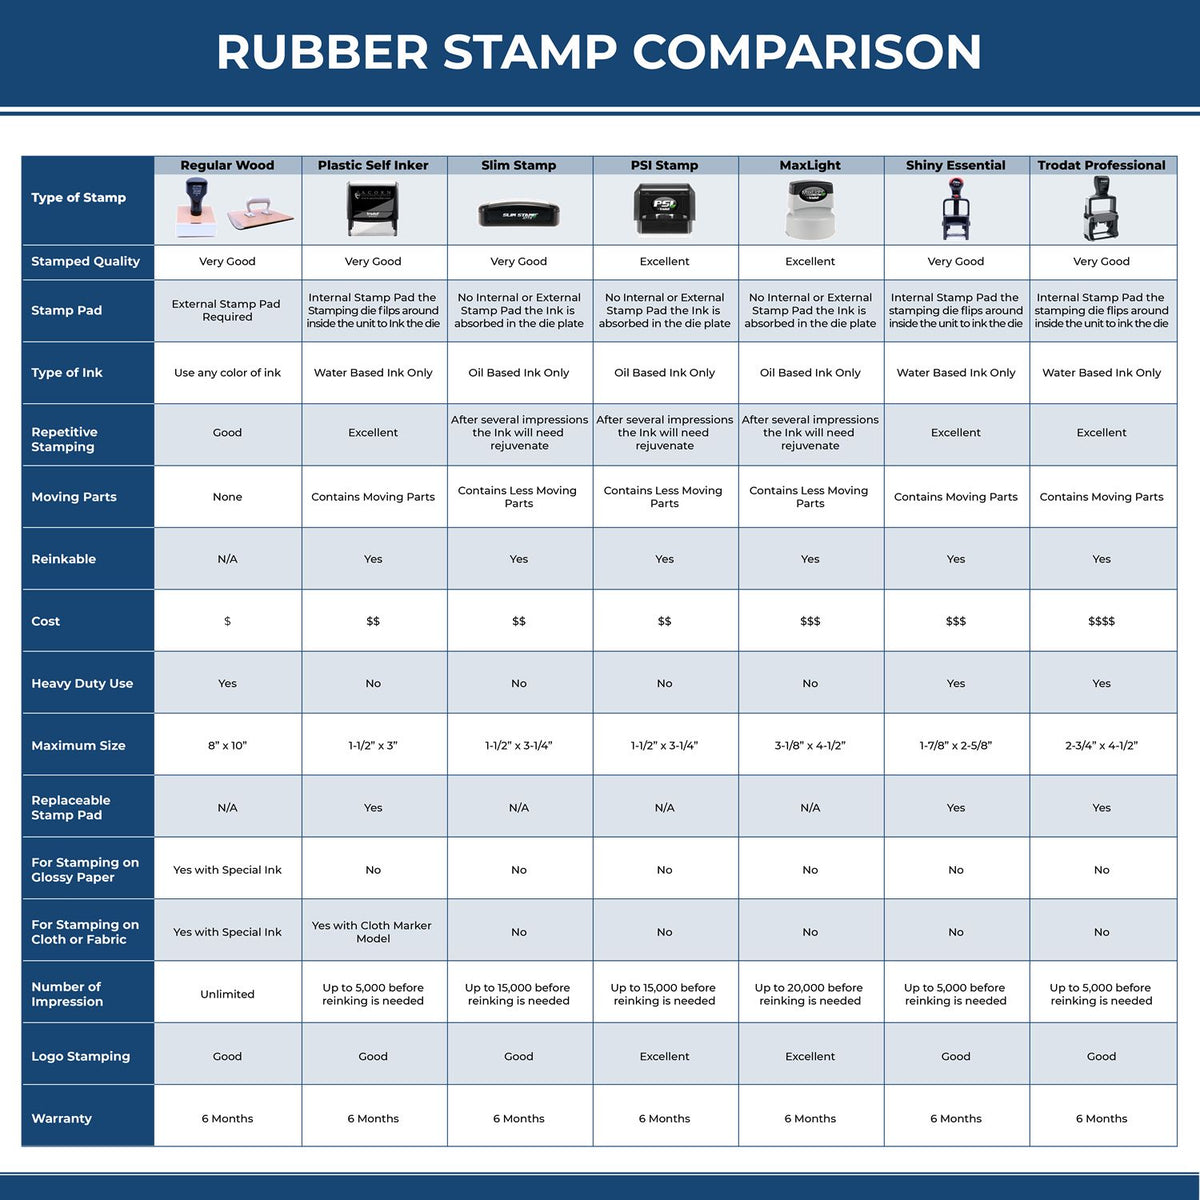 A comparison chart for the different types of mount models available for the Self-Inking Washington Landscape Architect Stamp.